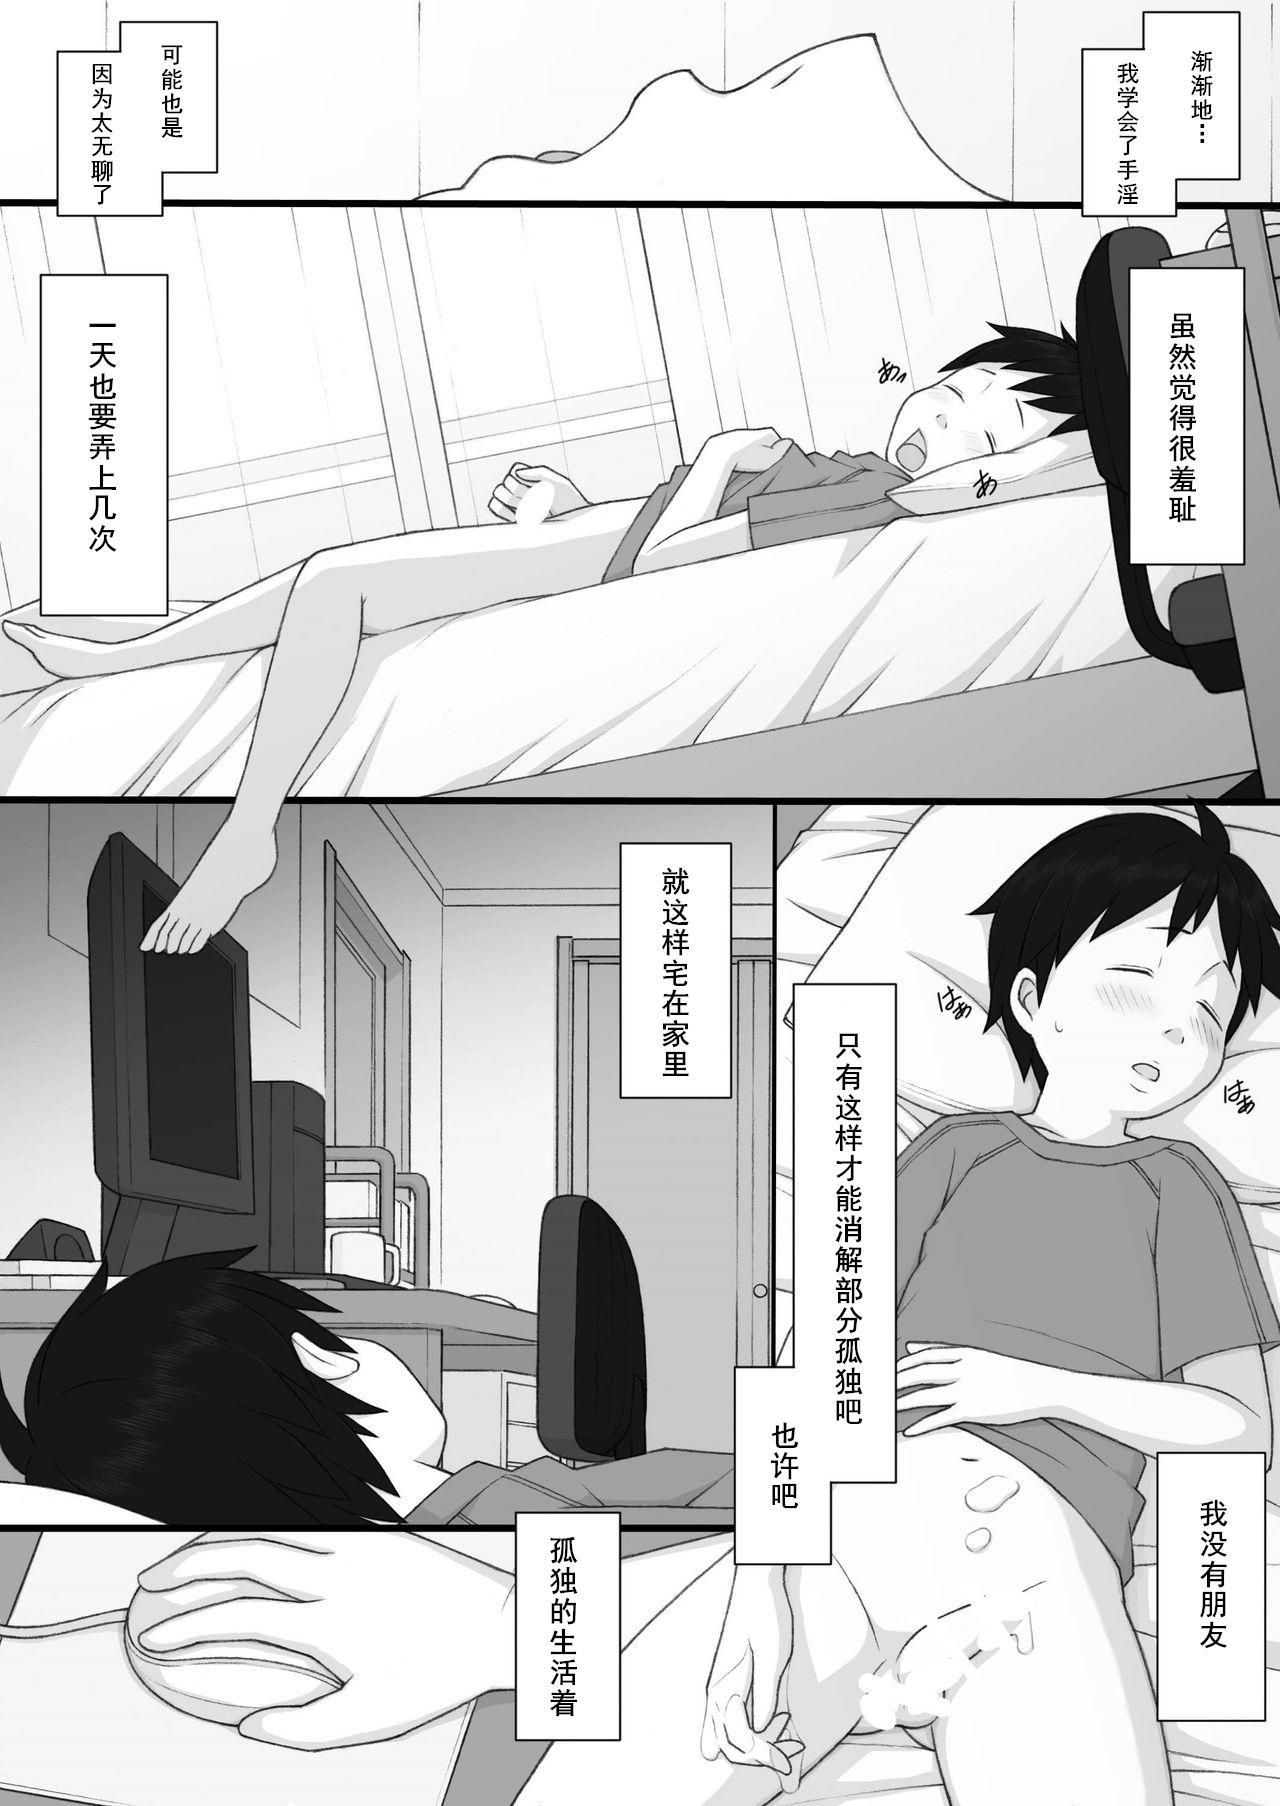 Staxxx [Ponpharse] Ponpharse - The Non-Fiction [Chinese] [cqxl自己汉化] - Original Lovers - Page 7